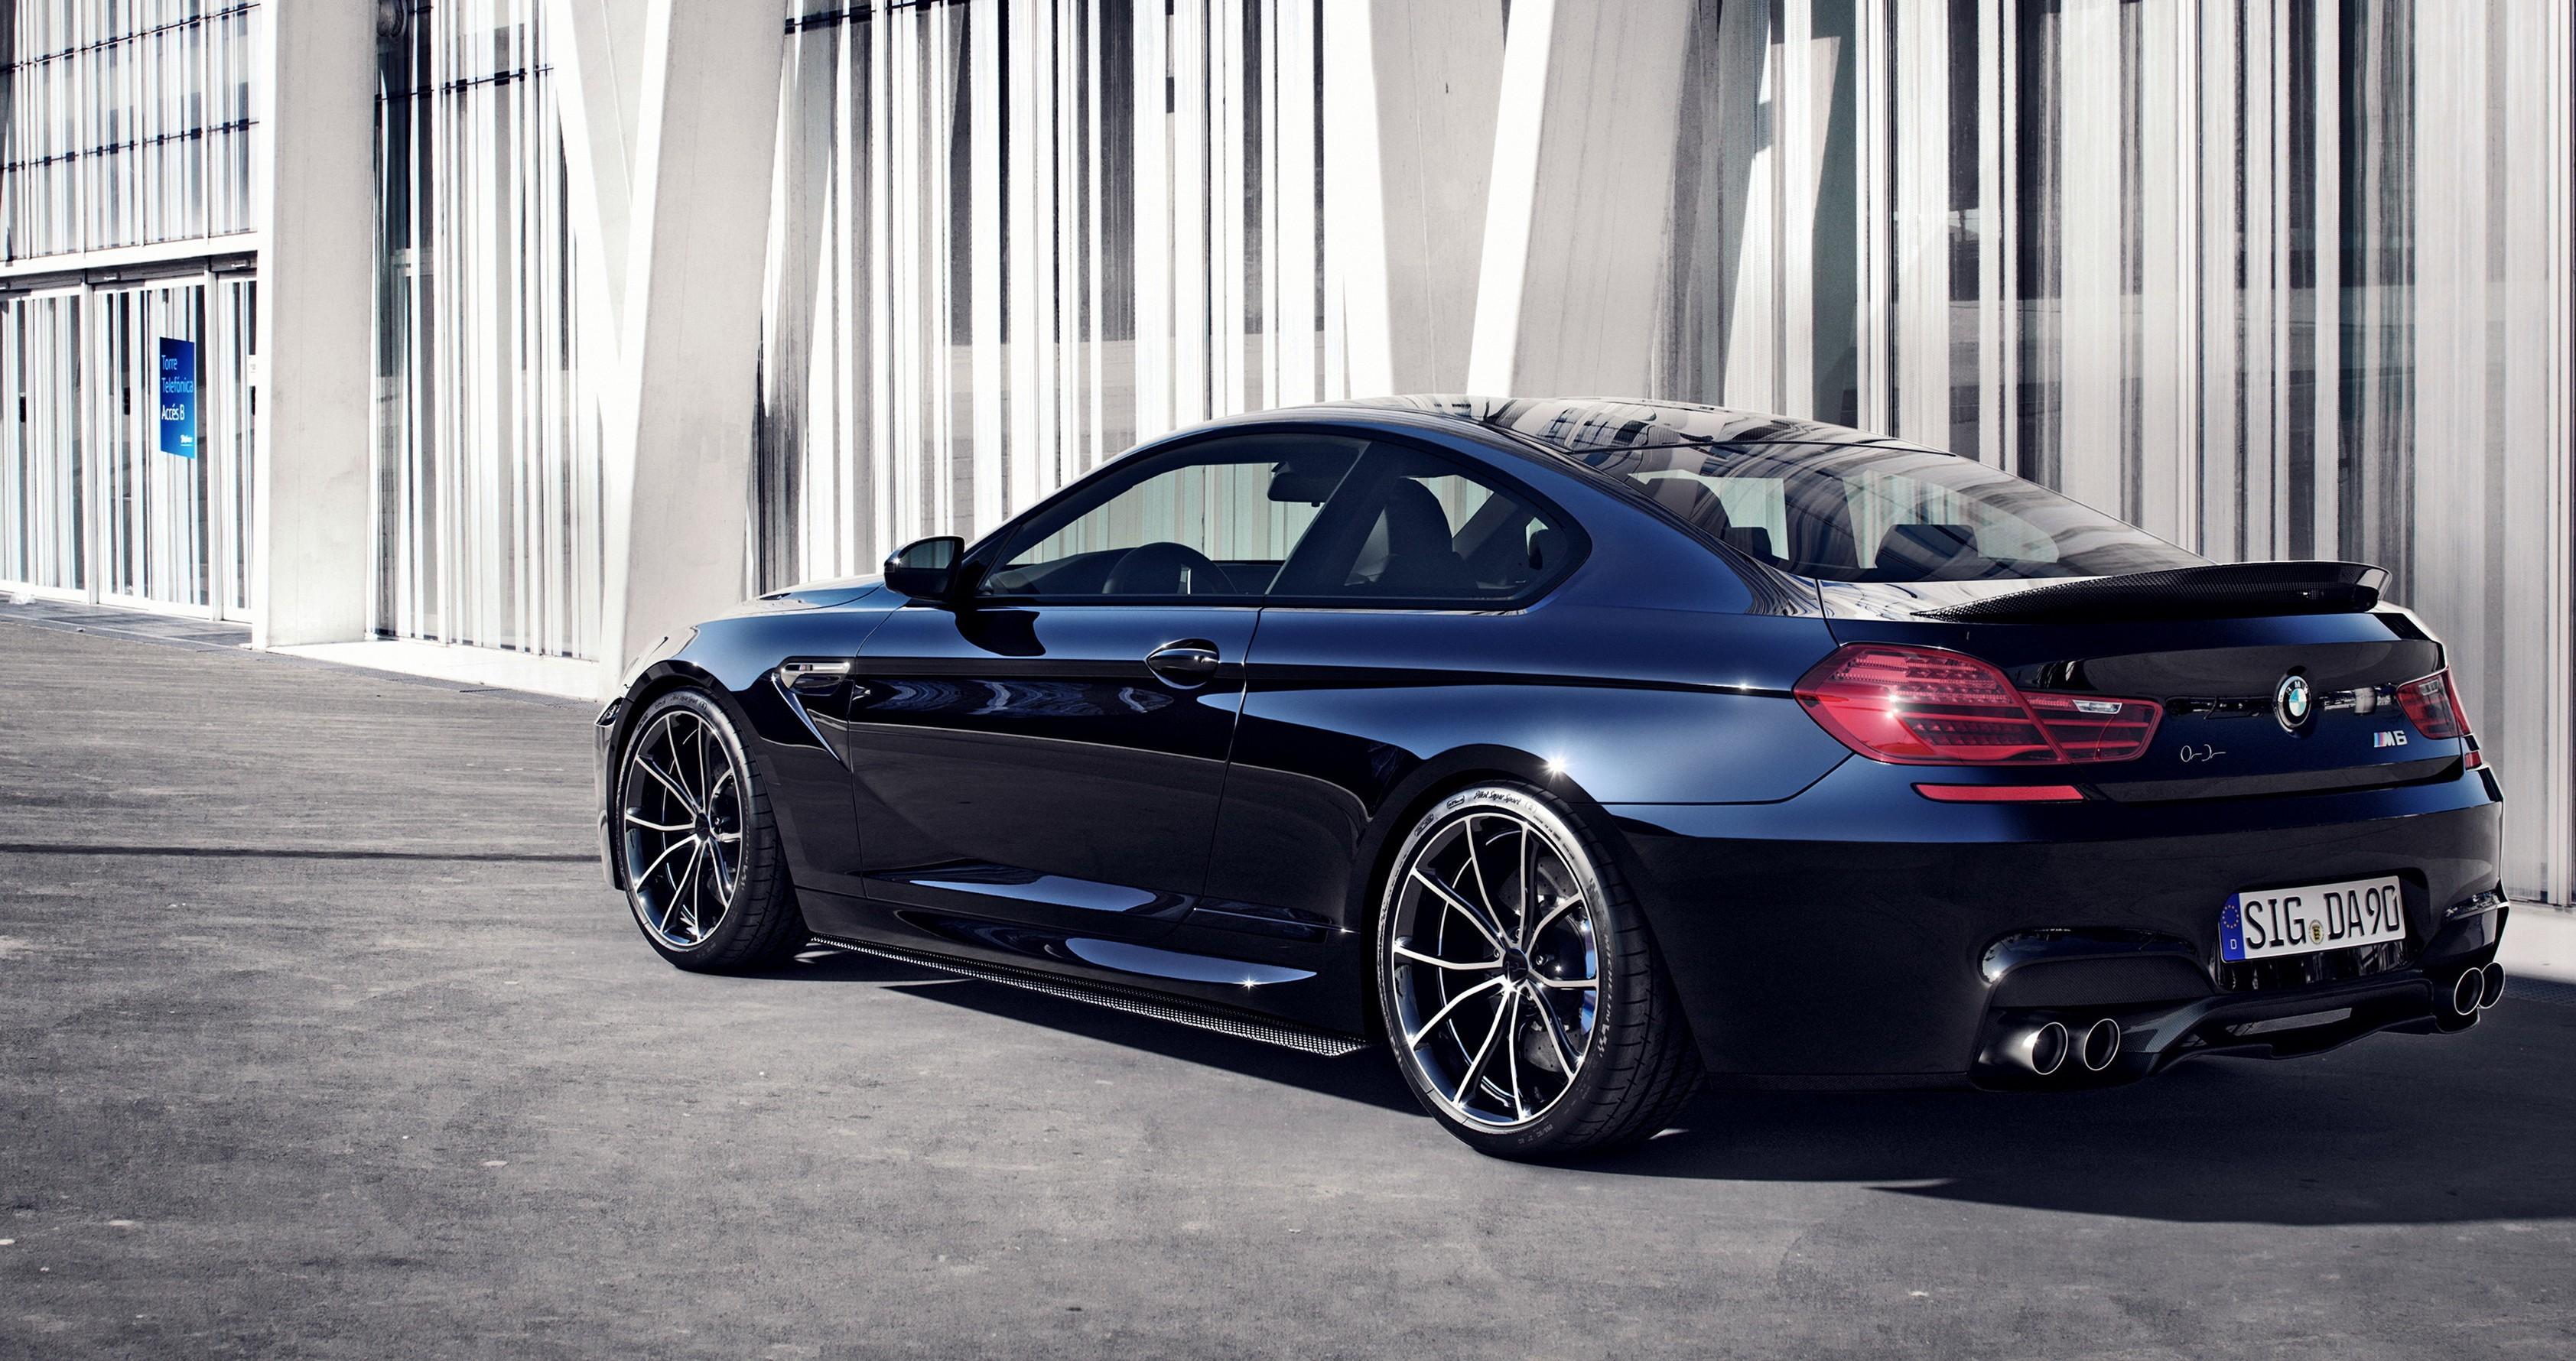 Bmw M6 Wallpapers Top Free Bmw M6 Backgrounds Wallpaperaccess